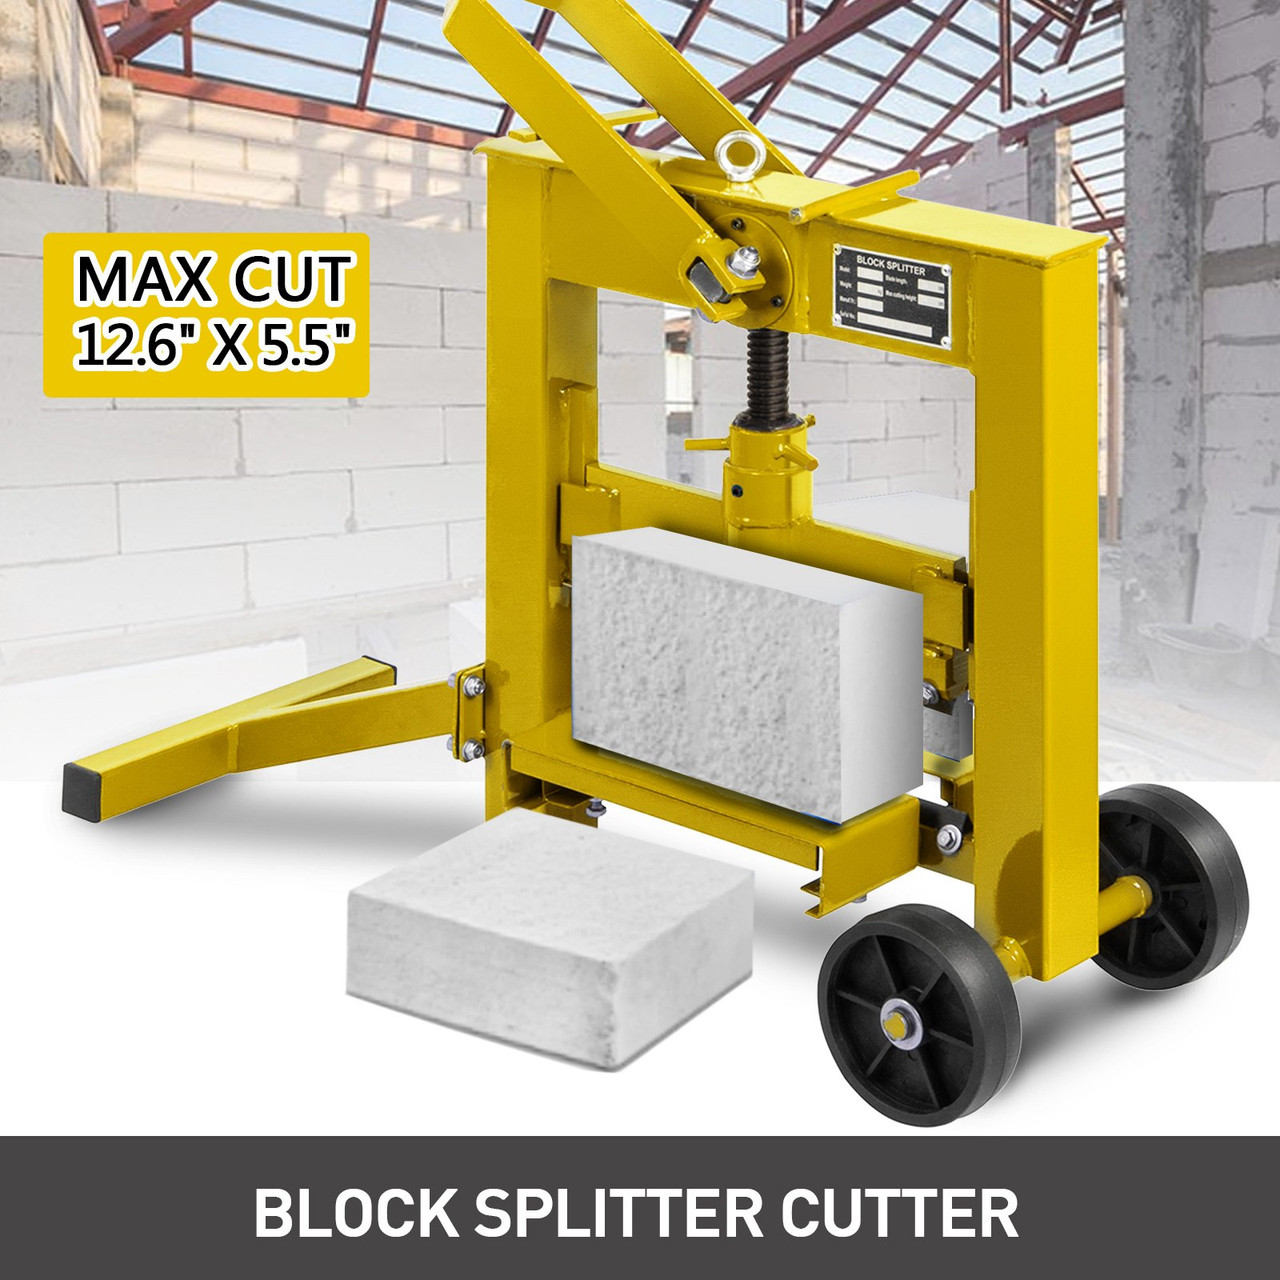 Pavers Splitter Tool Cutting Length Max.12.6 inches Manual Pavers Splitter Tool Cutting Height Max. 5.5 inches for Splitting Cutting Standard Paving Blocks with Portable Wheels (Yellow)